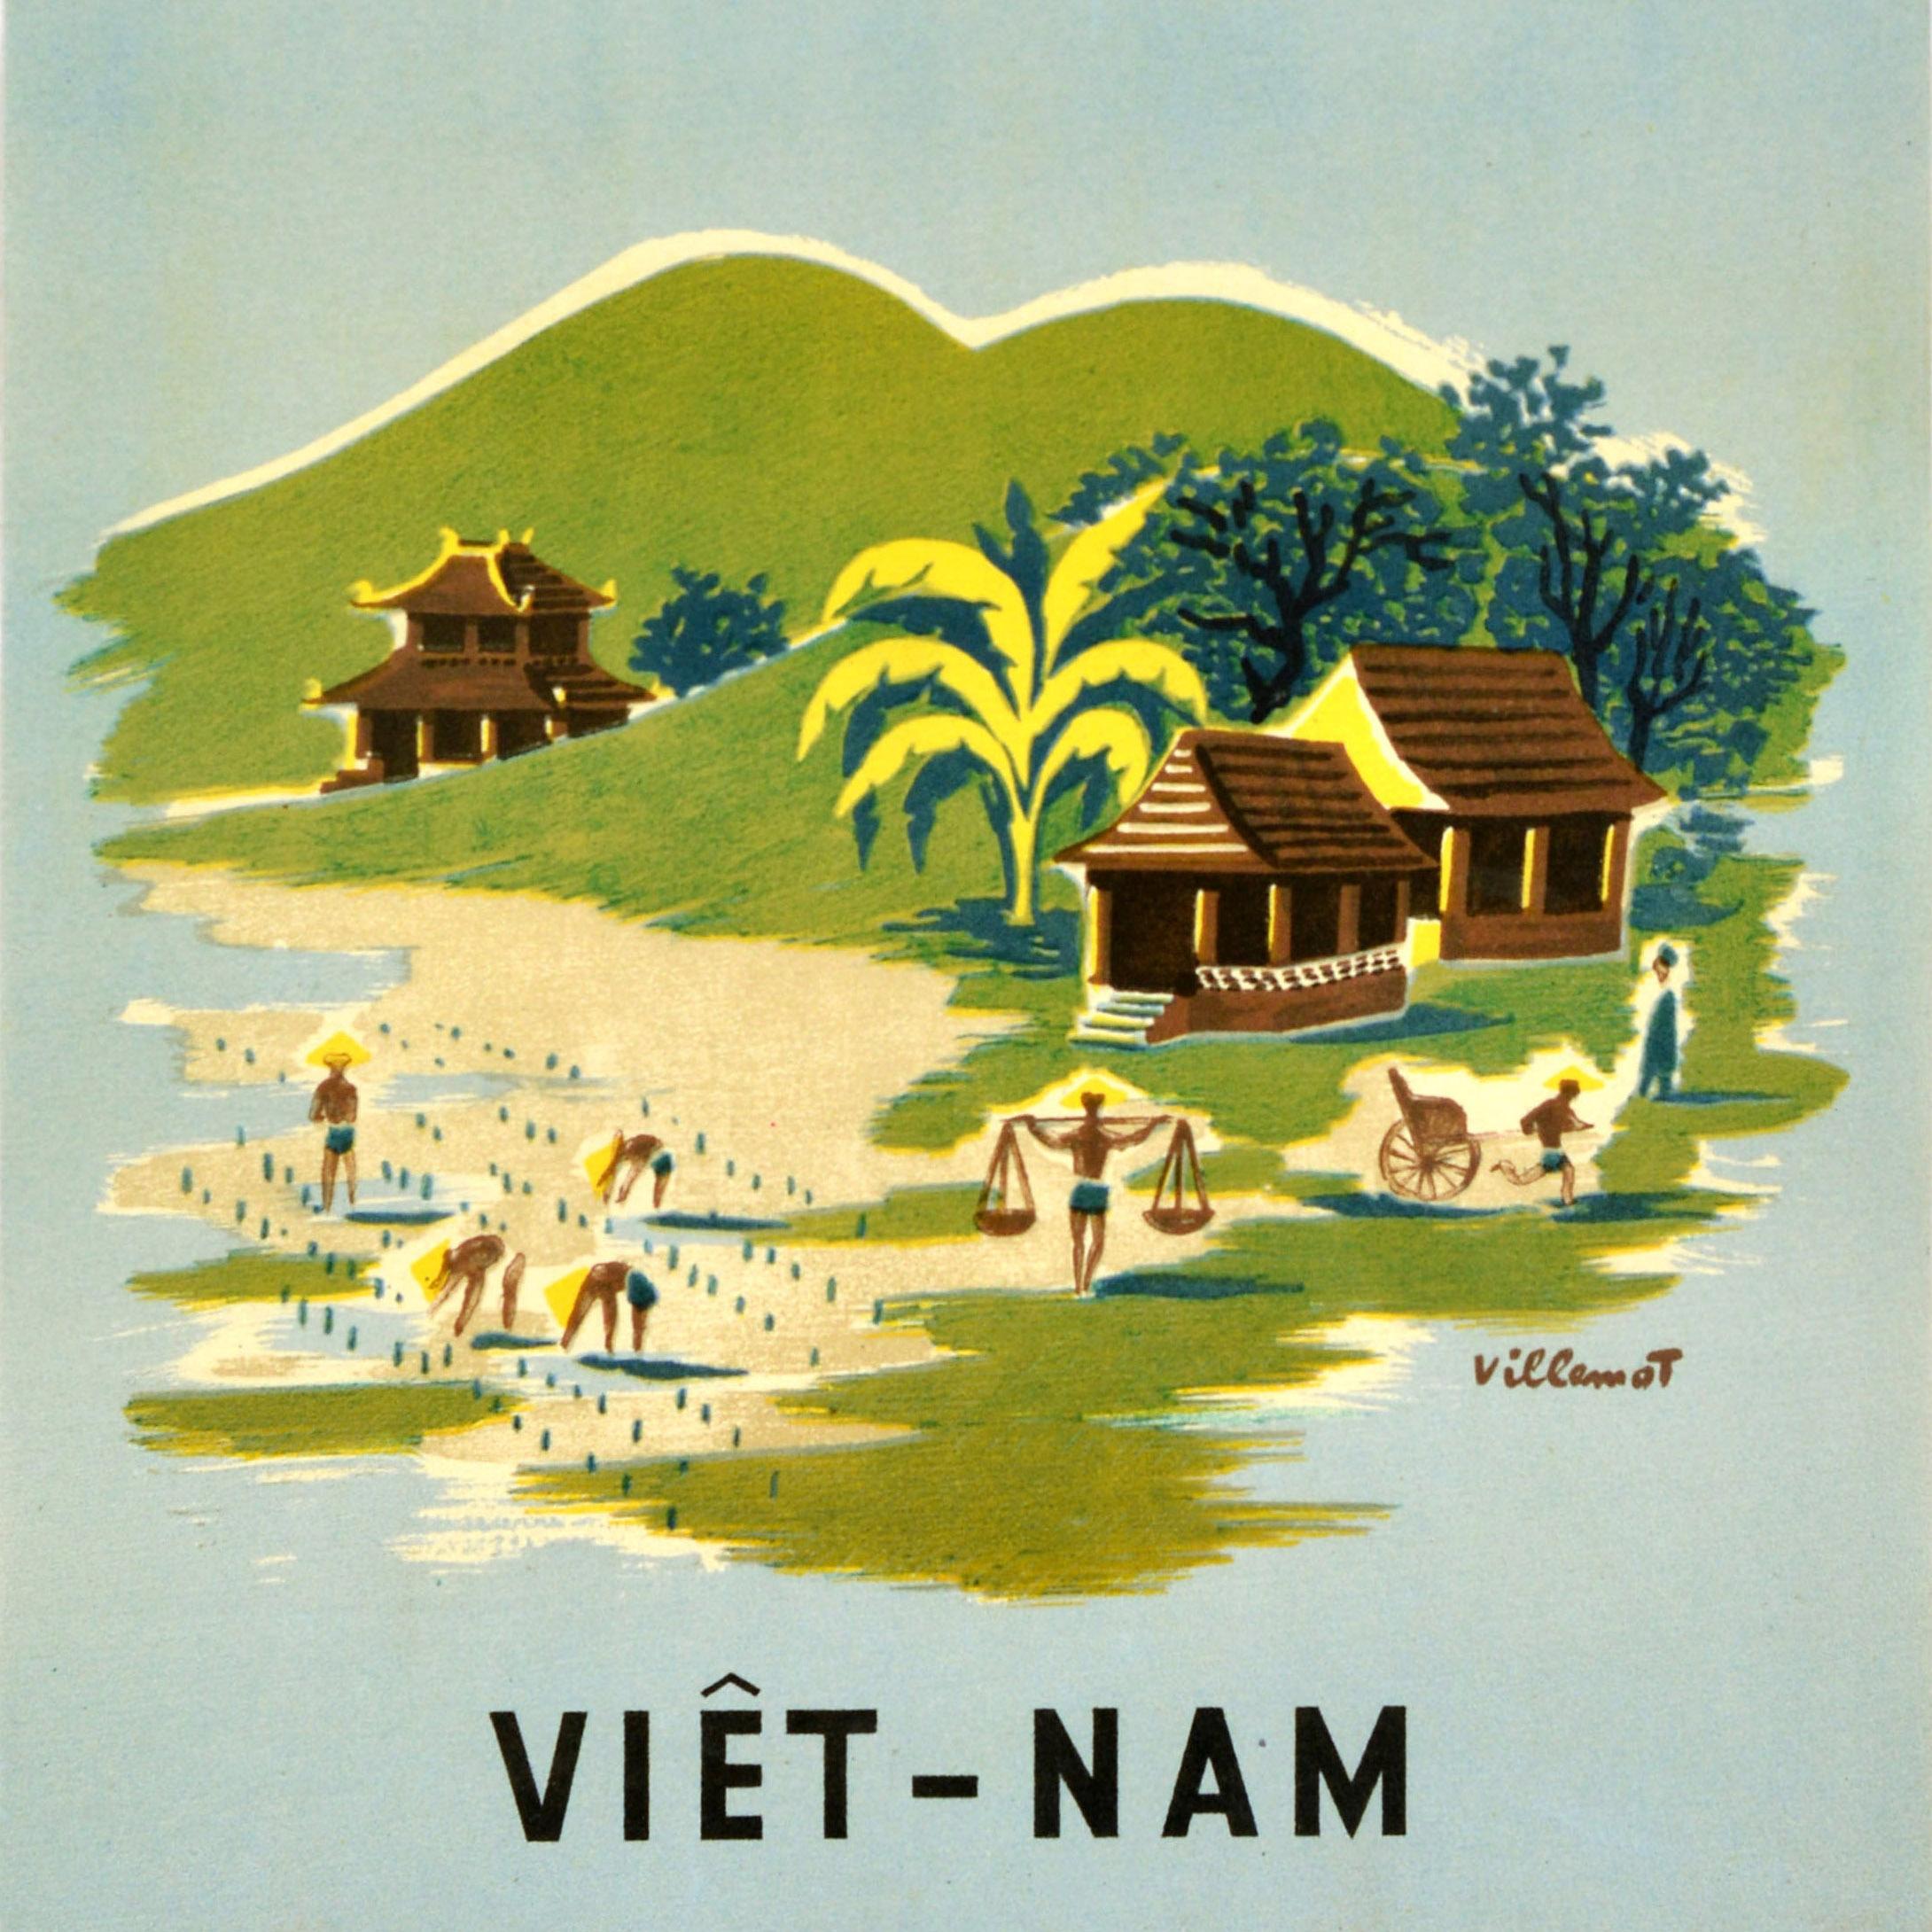 Original vintage travel poster for TAI Viet-Nam / Vietnam featuring colourful artwork by the renowned graphic artist Bernard Villemot (1911-1989) depicting a plane flying above a village with farmers working and people by traditional buildings and